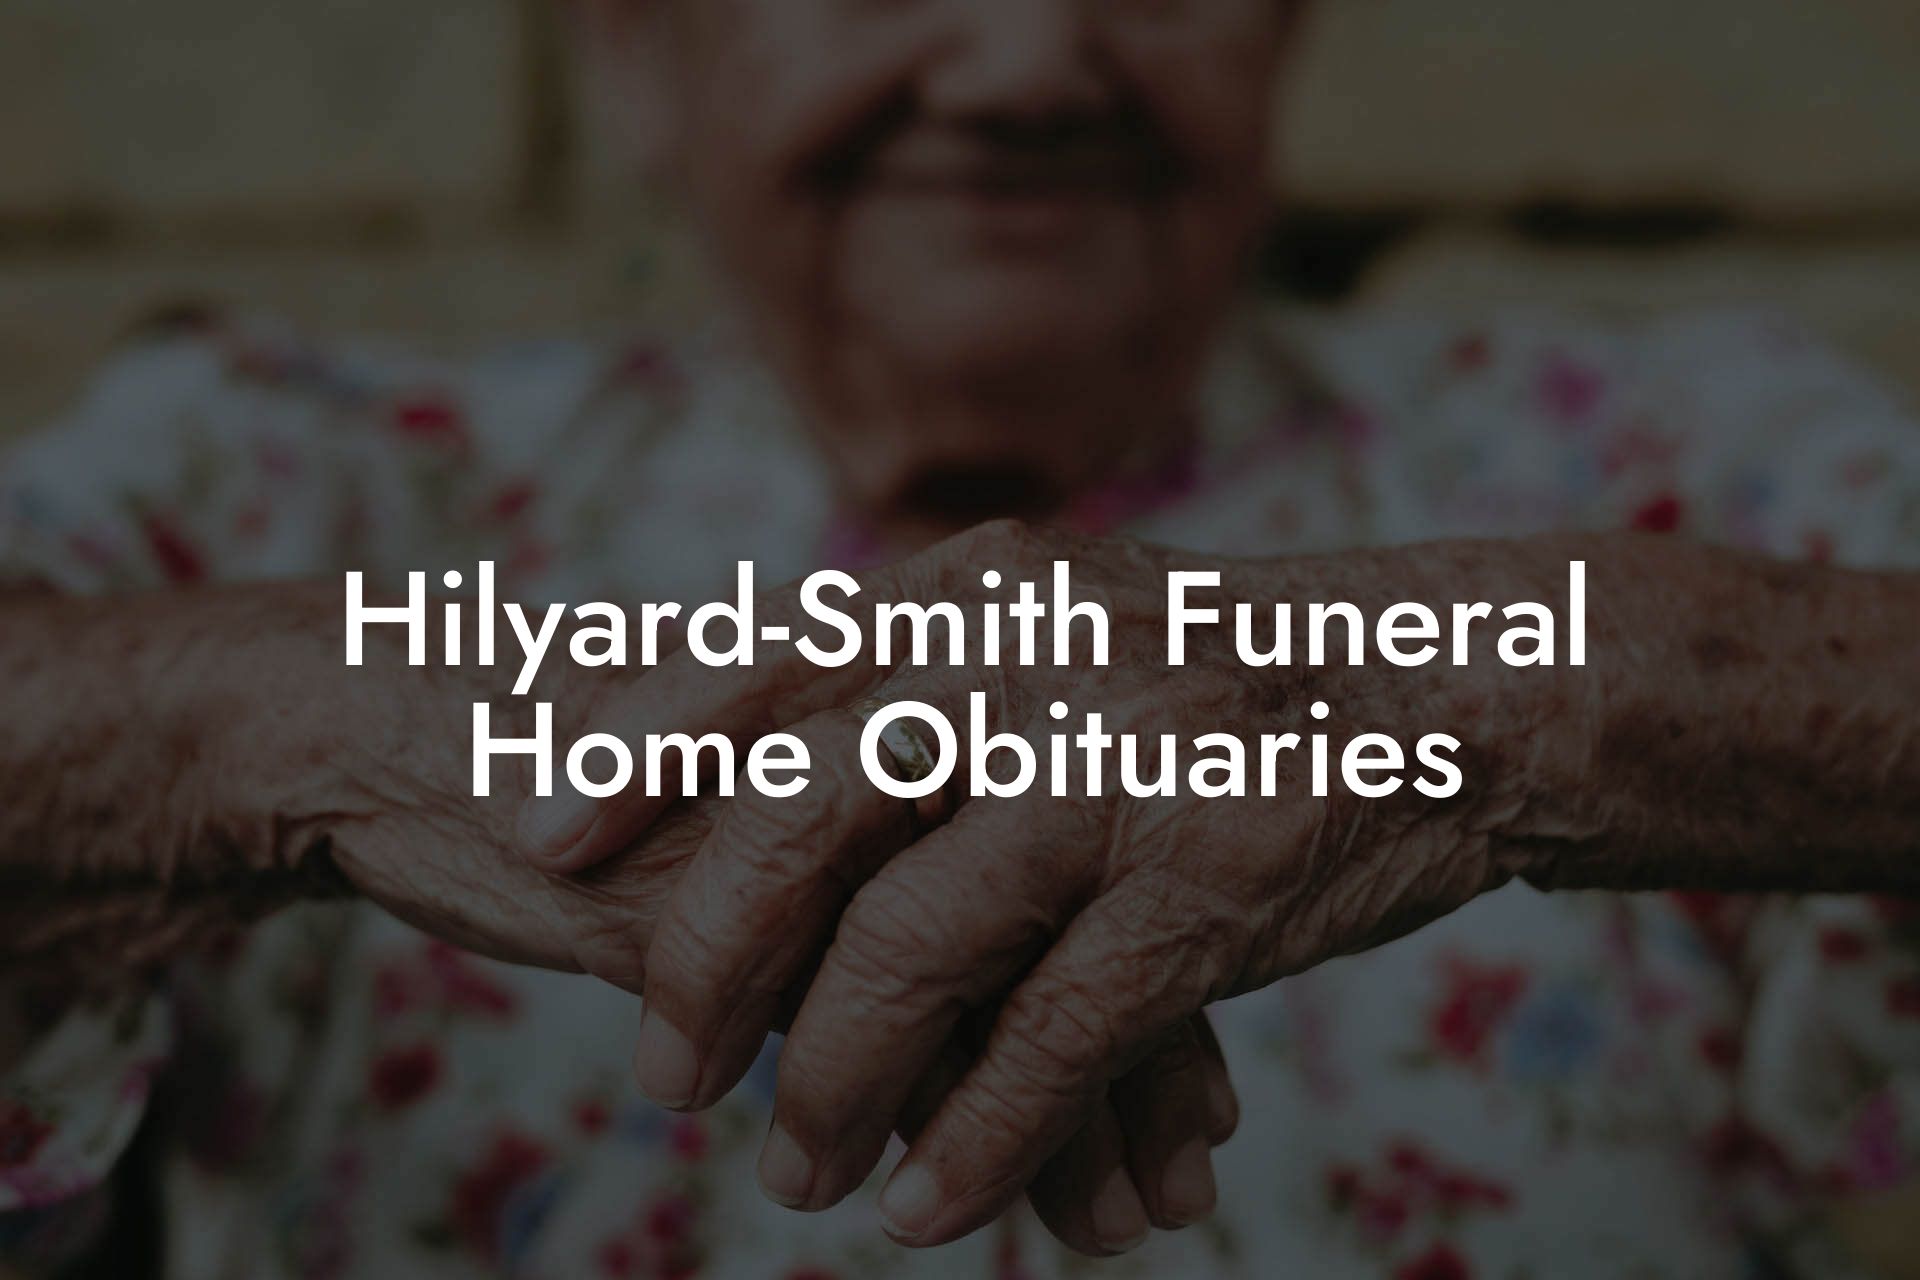 Hilyard-Smith Funeral Home Obituaries